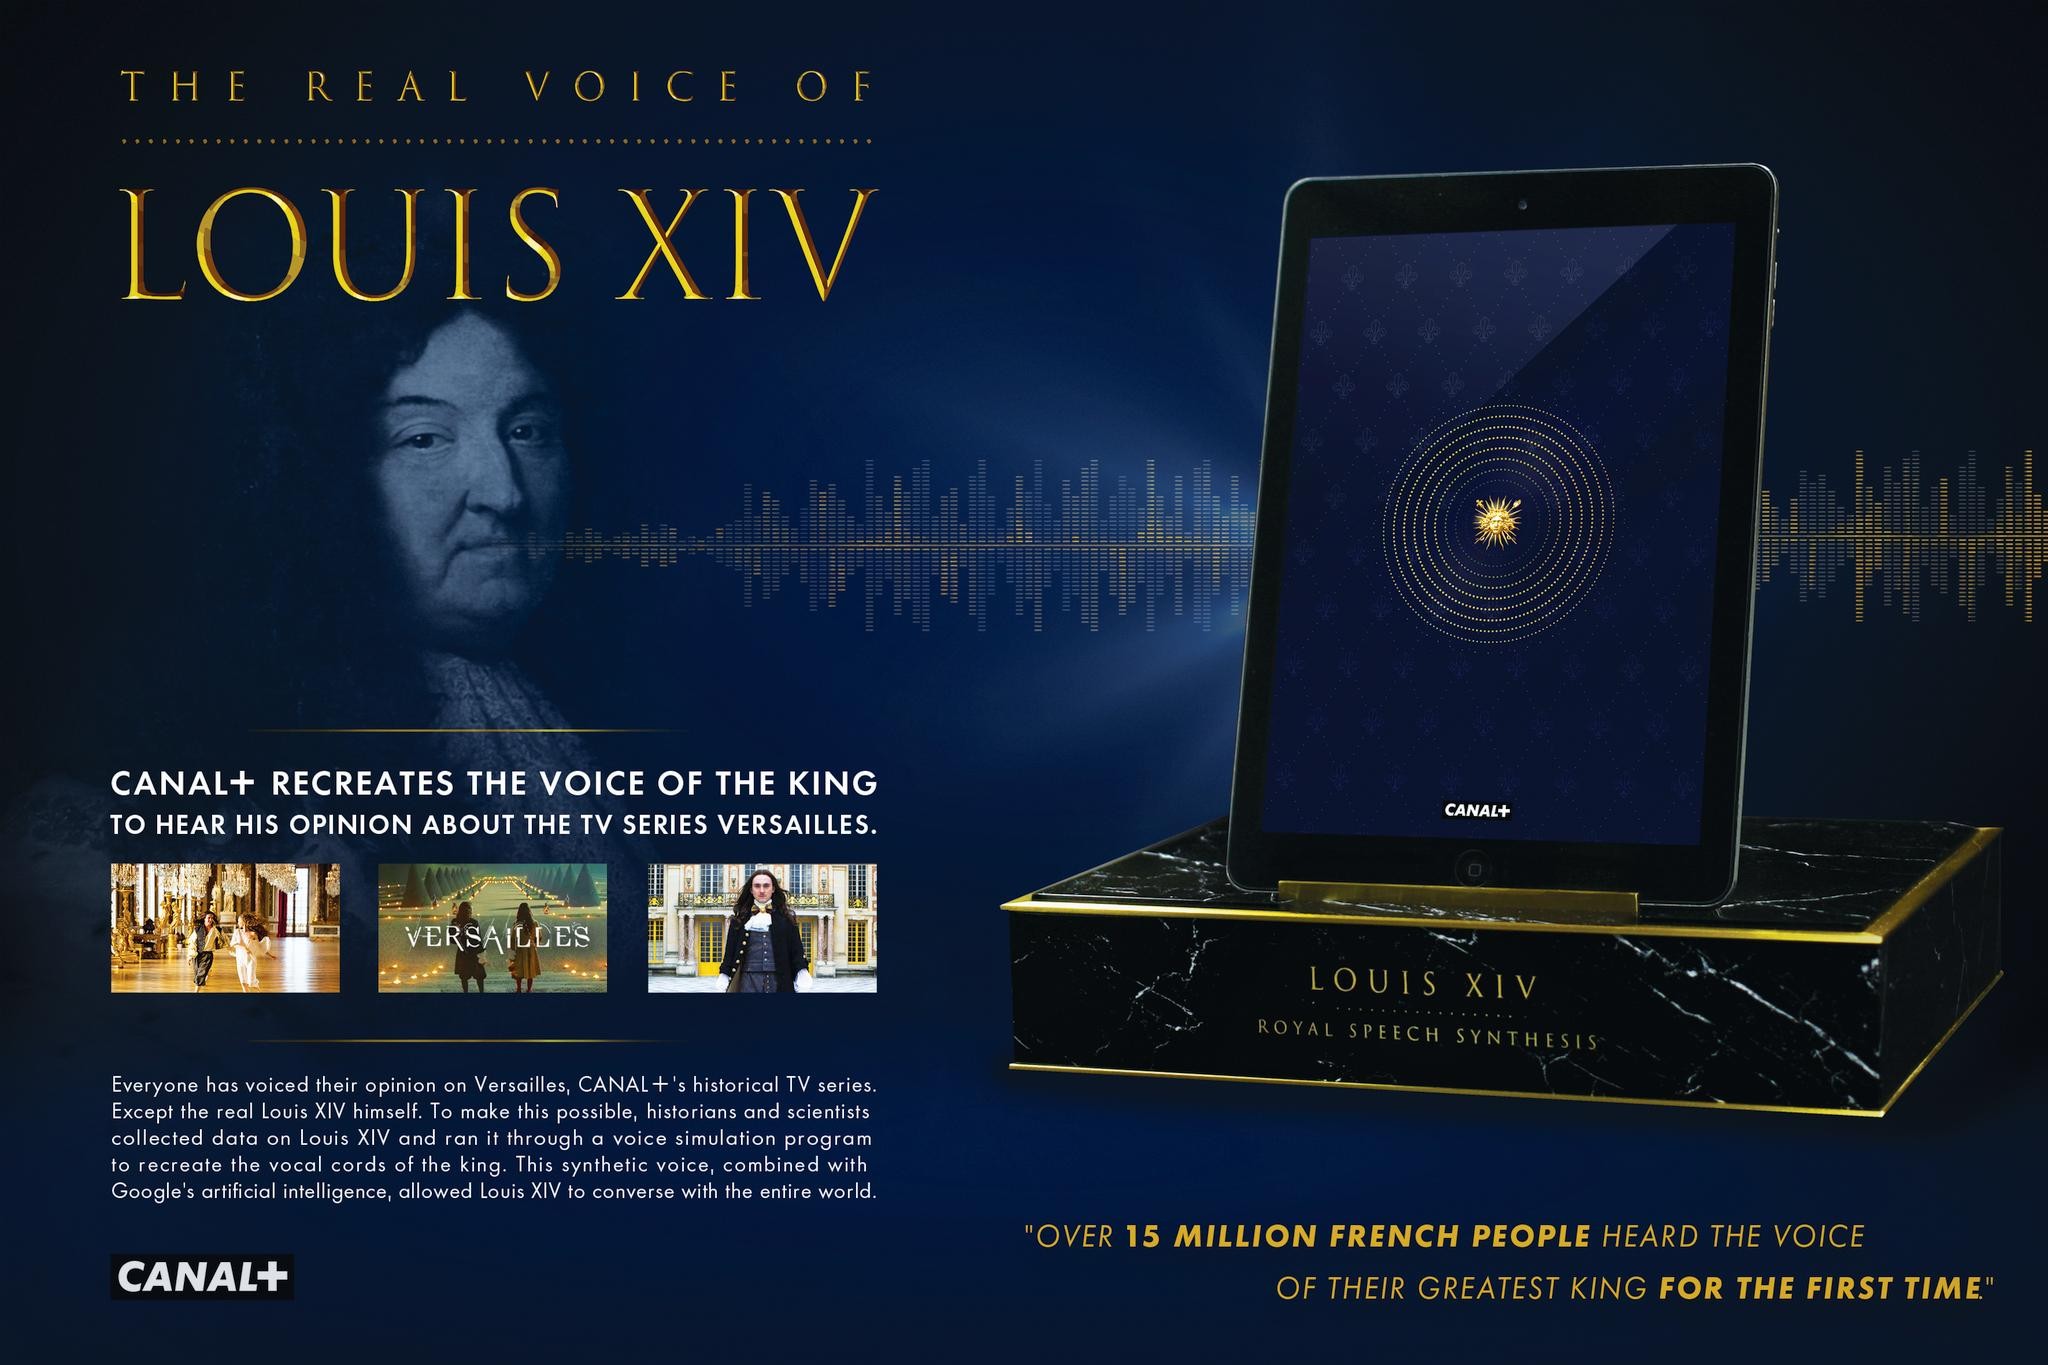 The real voice of Louis XIV